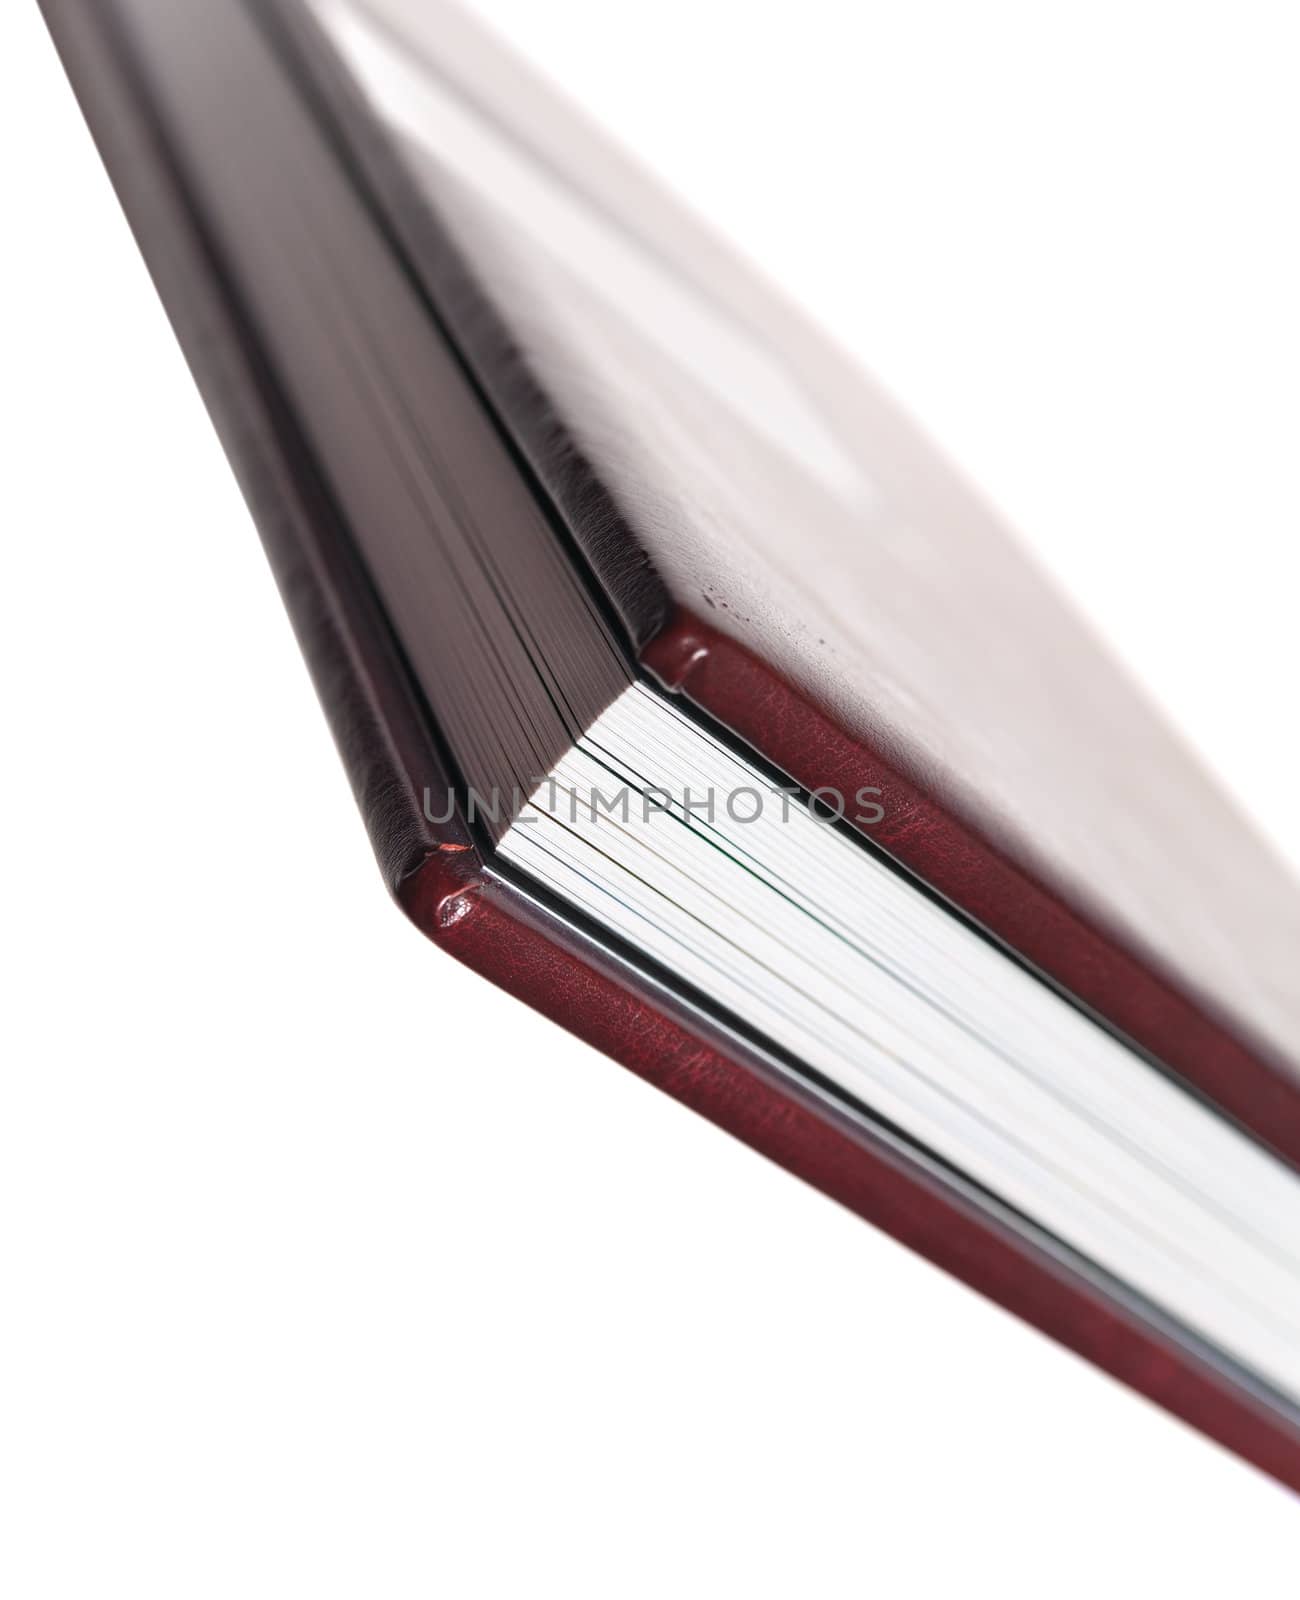 side view of book with leatherette cover on white backgrounds by docer2000